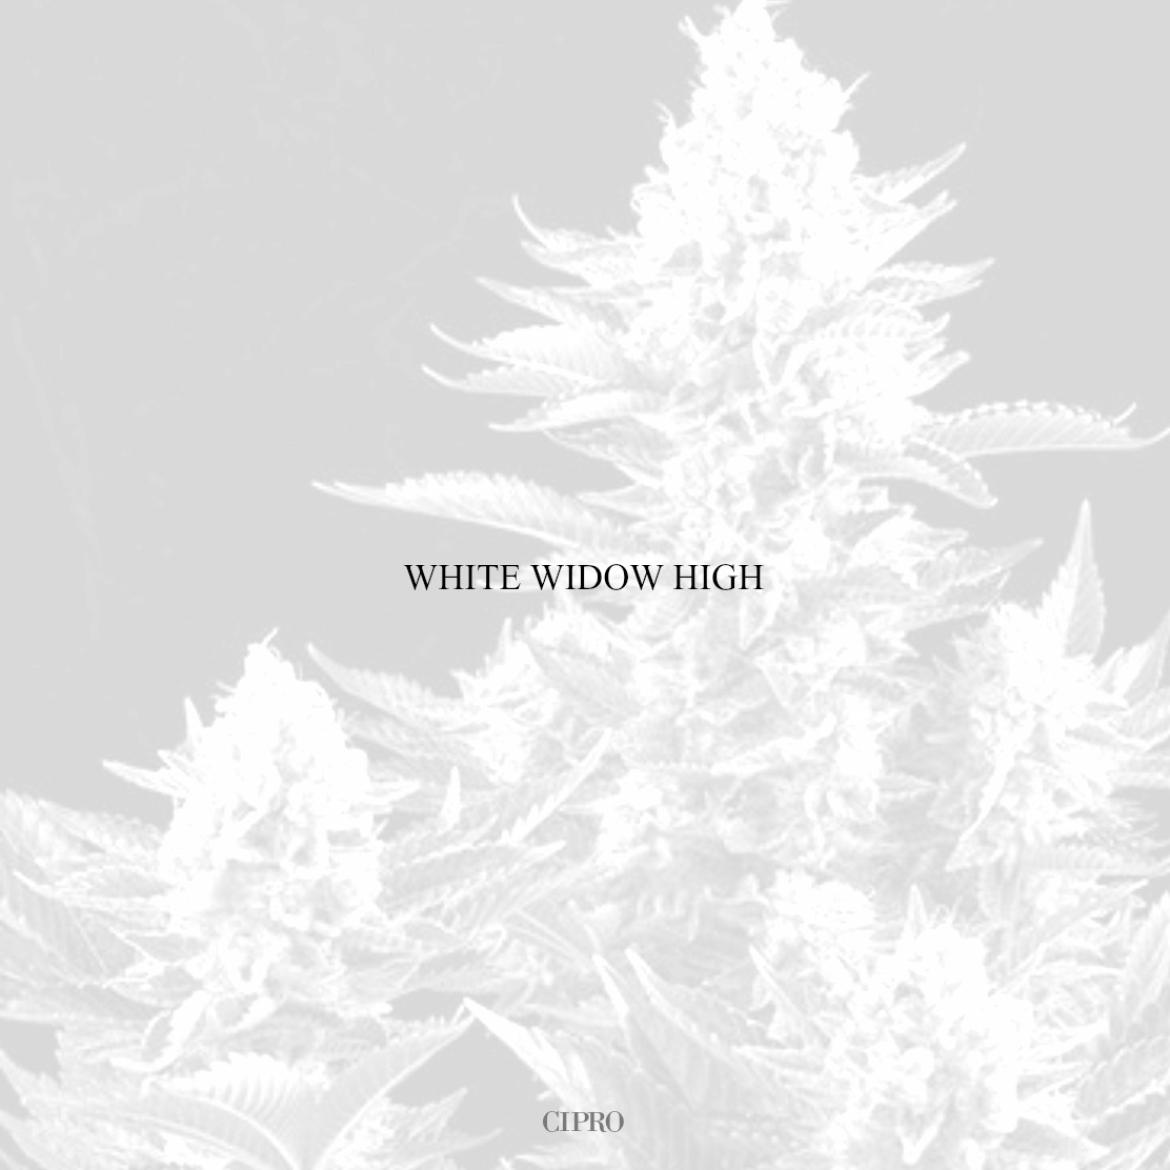 WHITE WIDOW HIGH by CIPRO